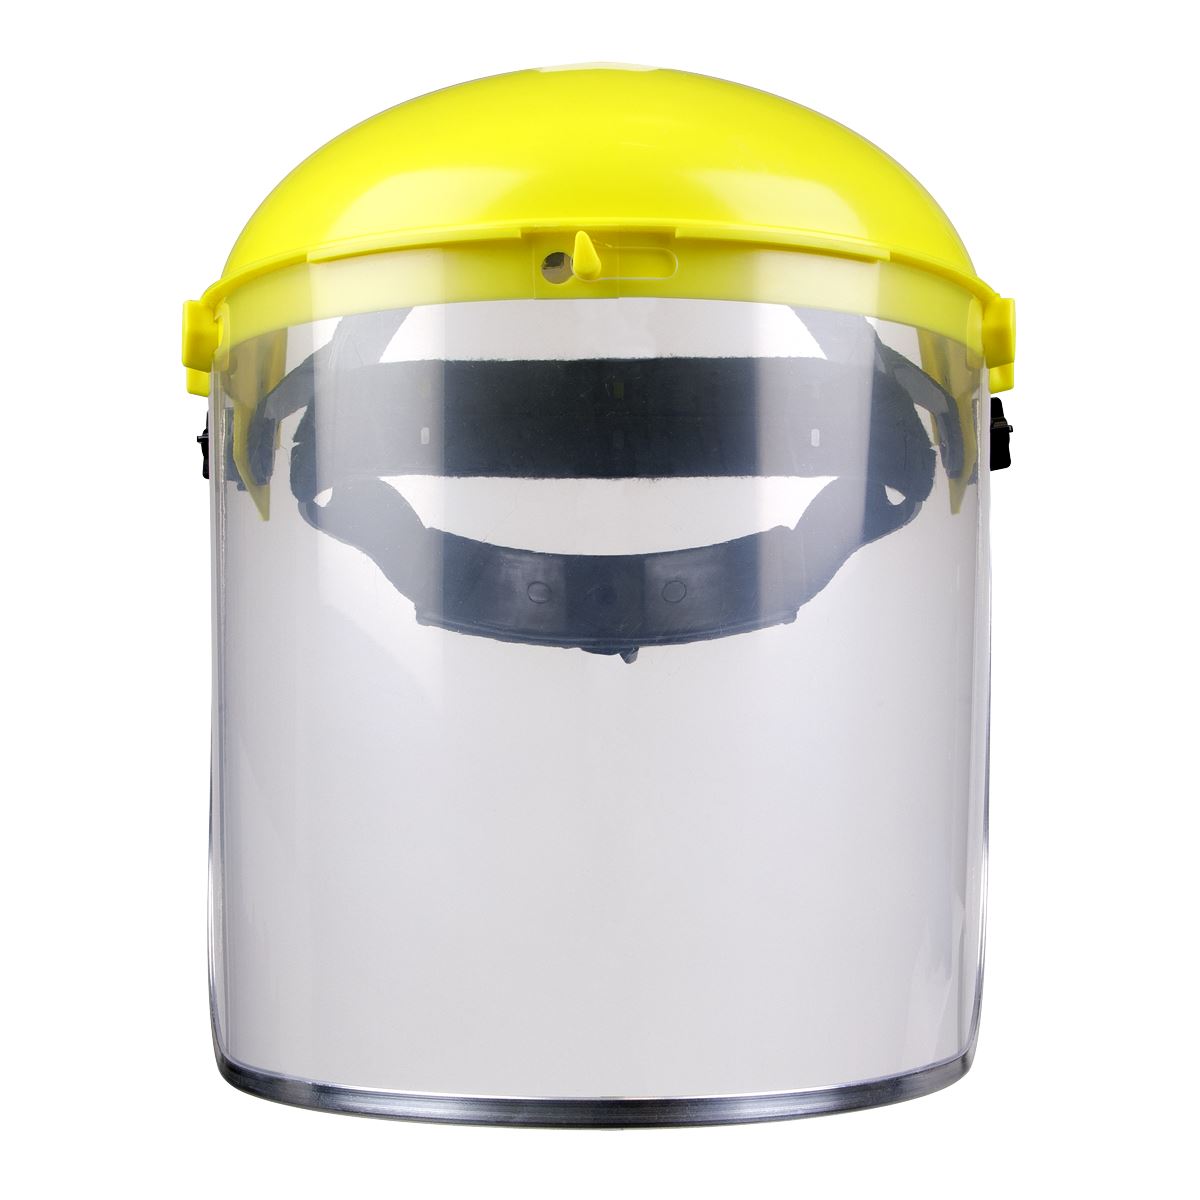 Worksafe by Sealey Brow Guard with Full Face Shield